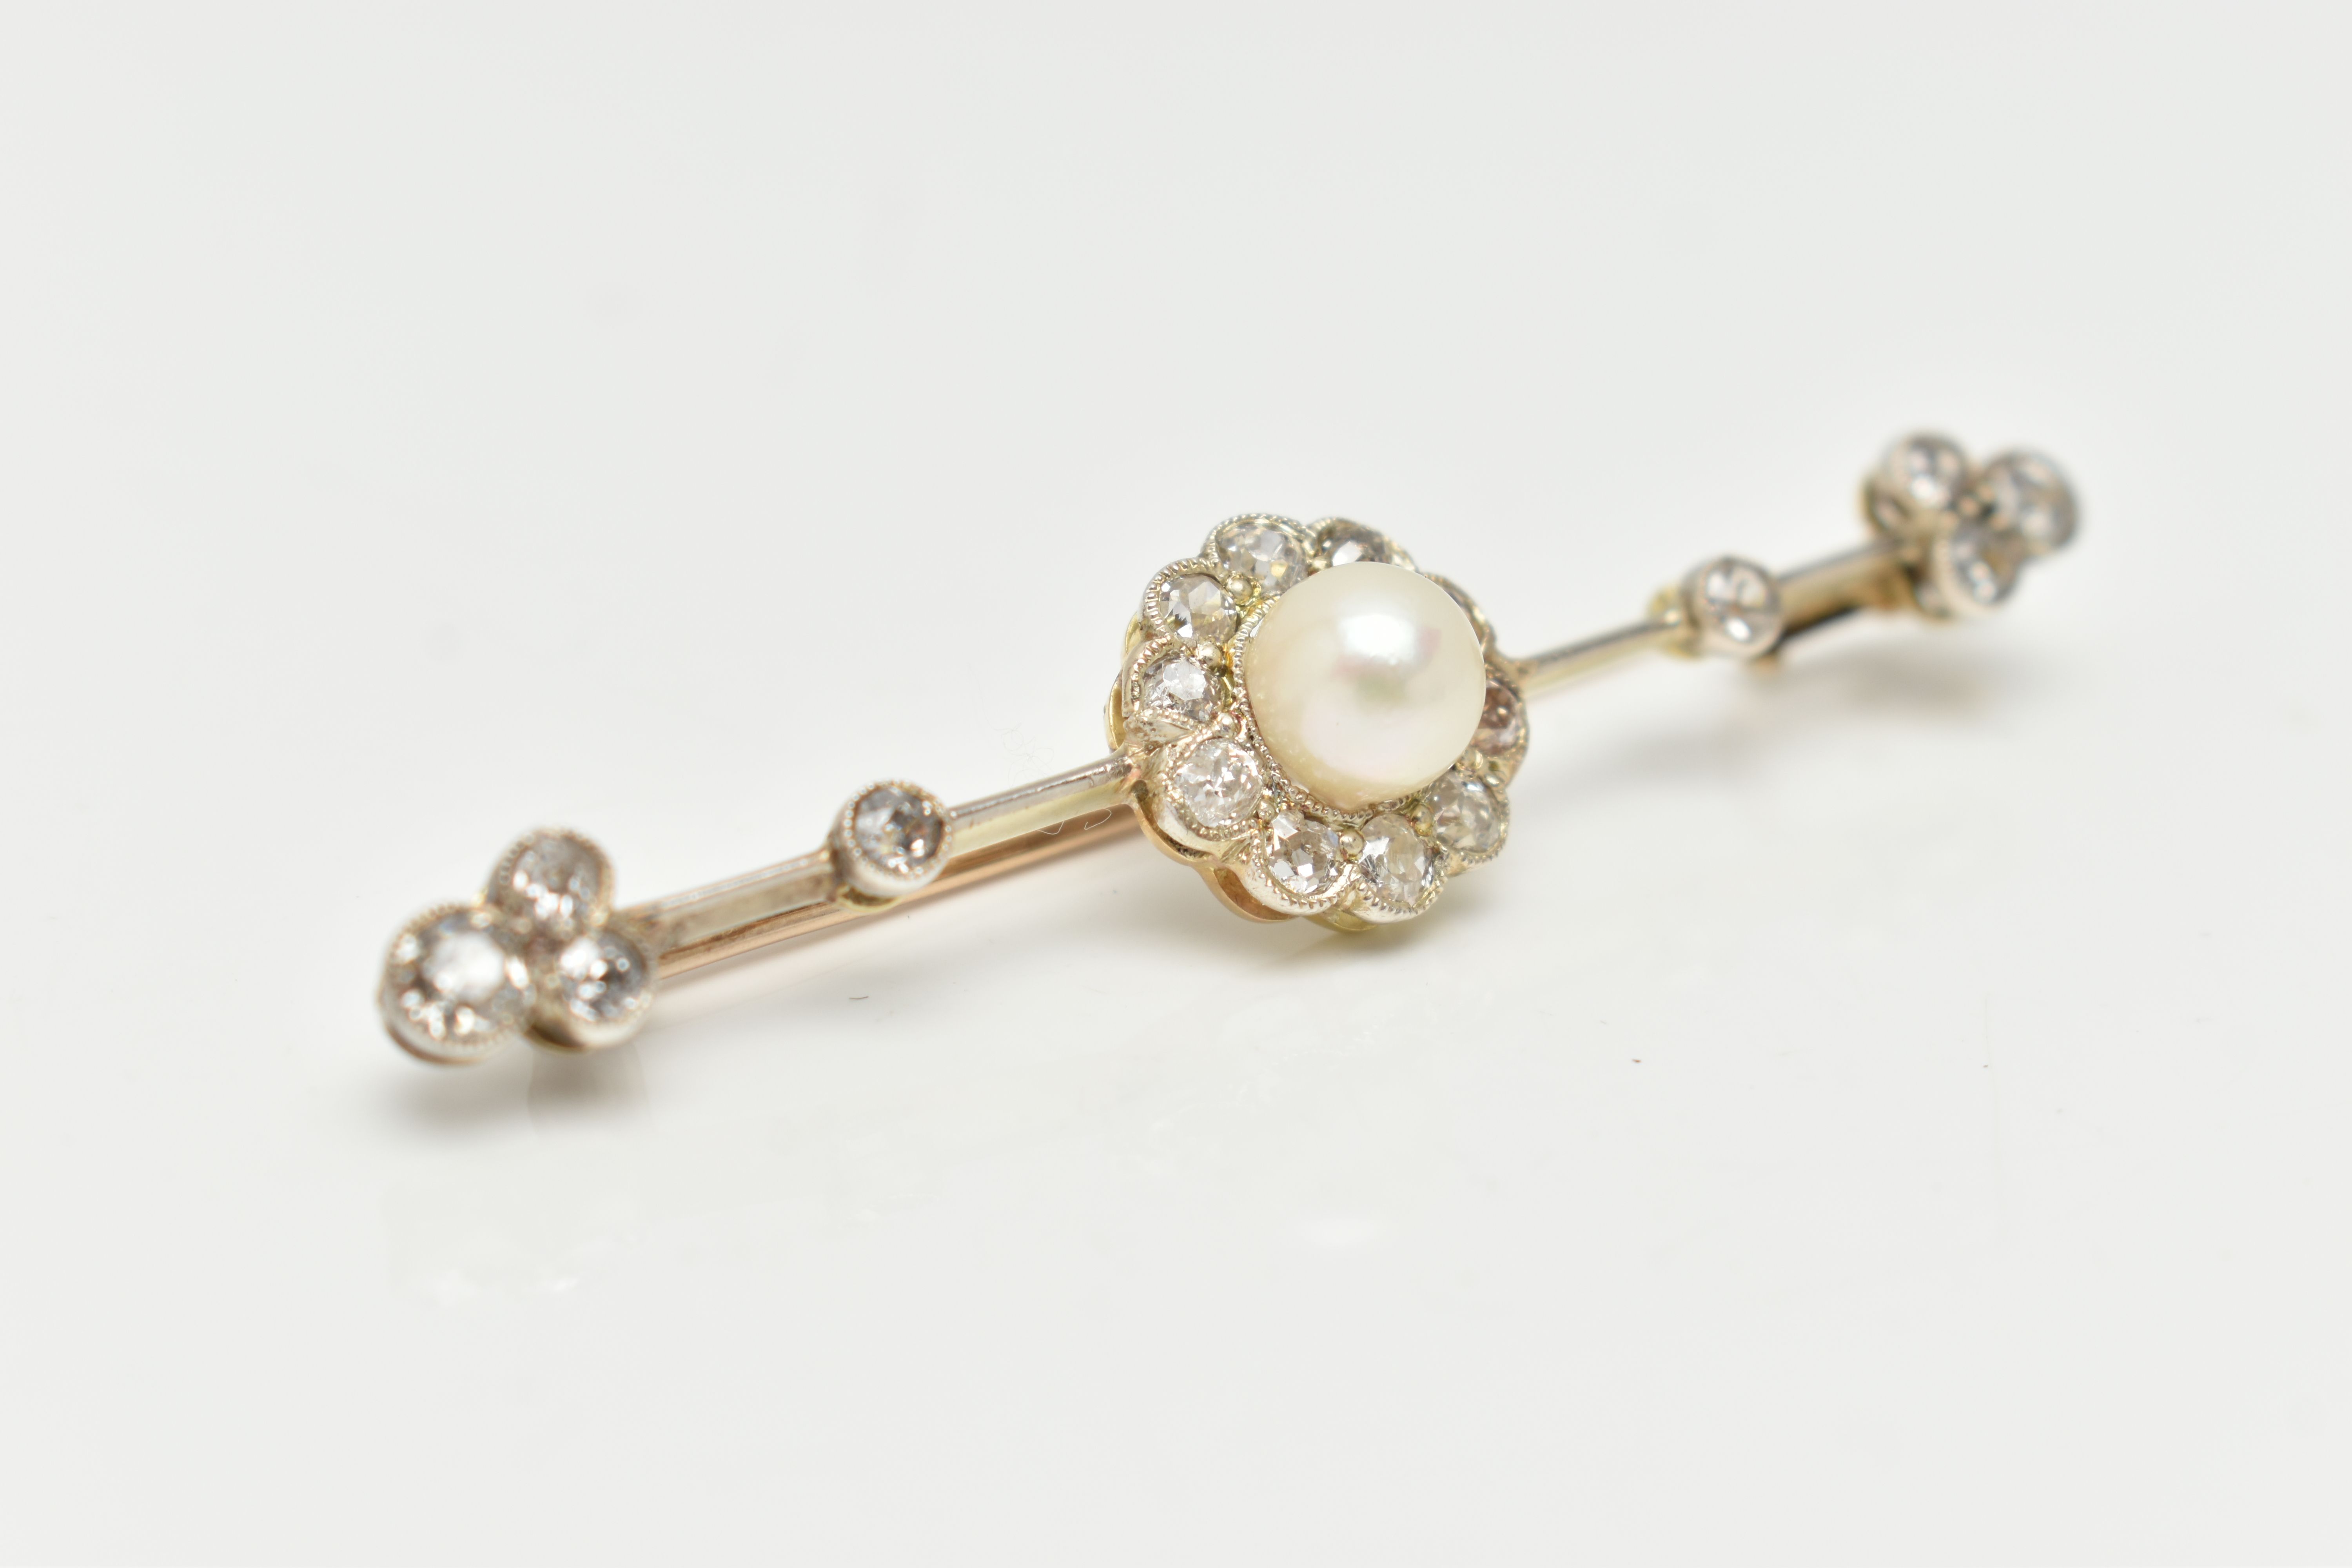 AN EARLY 20TH CENTURY, YELLOW AND WHITE METAL DIAMOND AND PEARL BAR BROOCH, centering on a single - Image 2 of 4